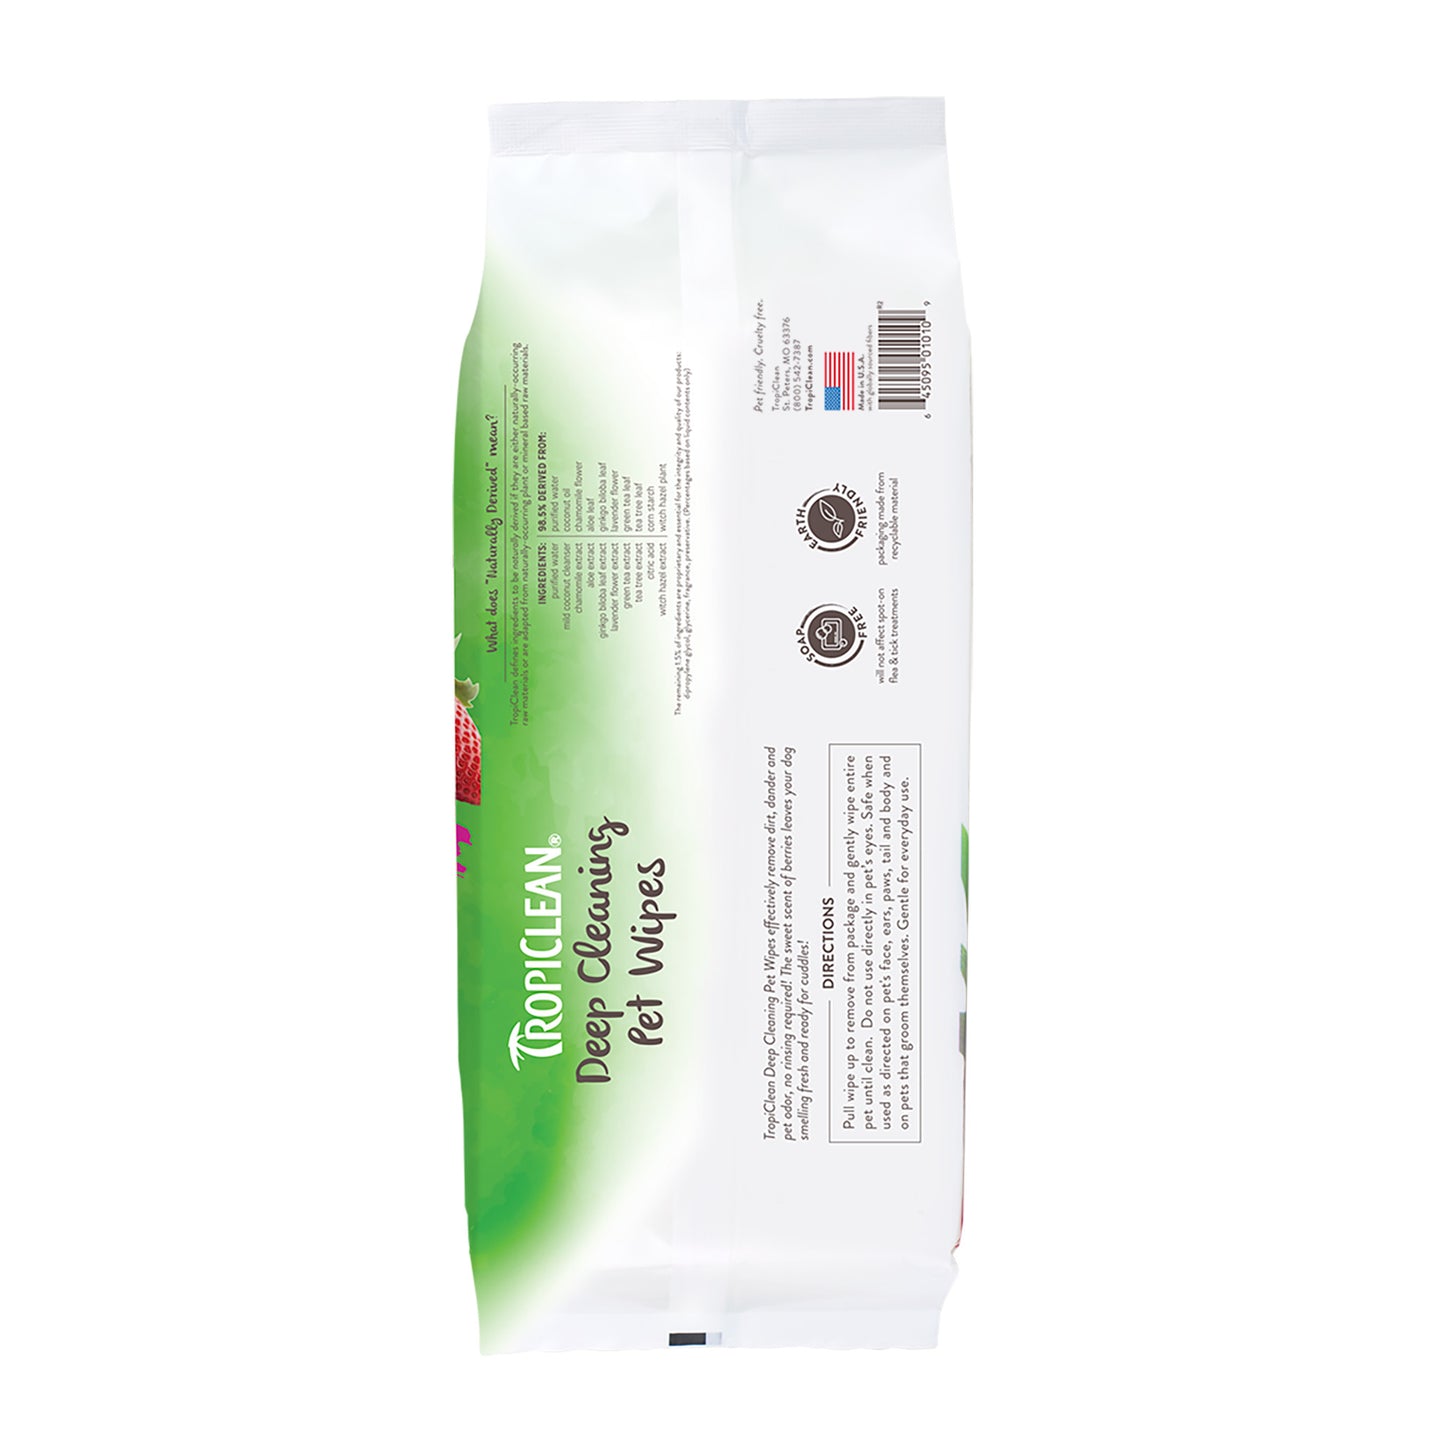 TropiClean Deep Cleaning Berry & Coconut Deodorizing Wipes